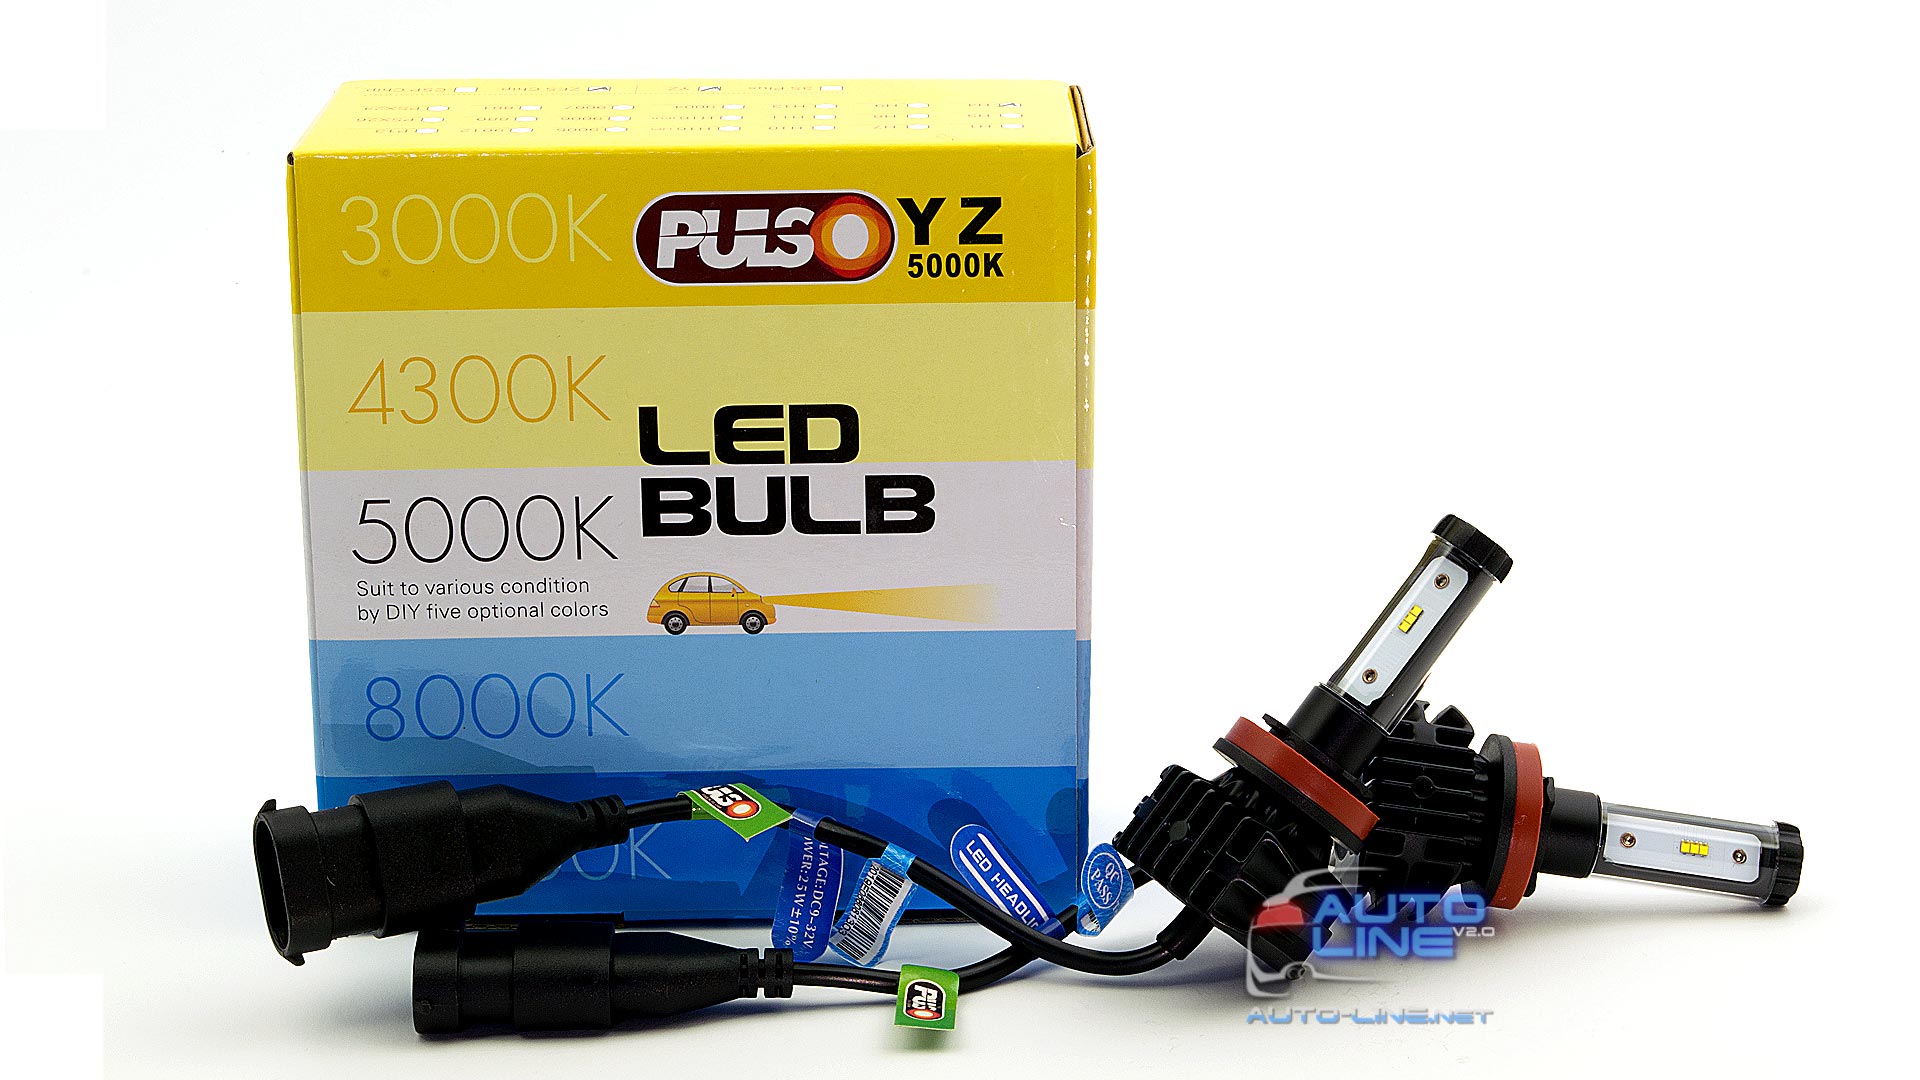 Фото 1 - PULSO YZ H11 LED-chips ZES-Philips 9-32v 25w 4500Lm 3000-4300-5000-8000-10000K YZ-H11